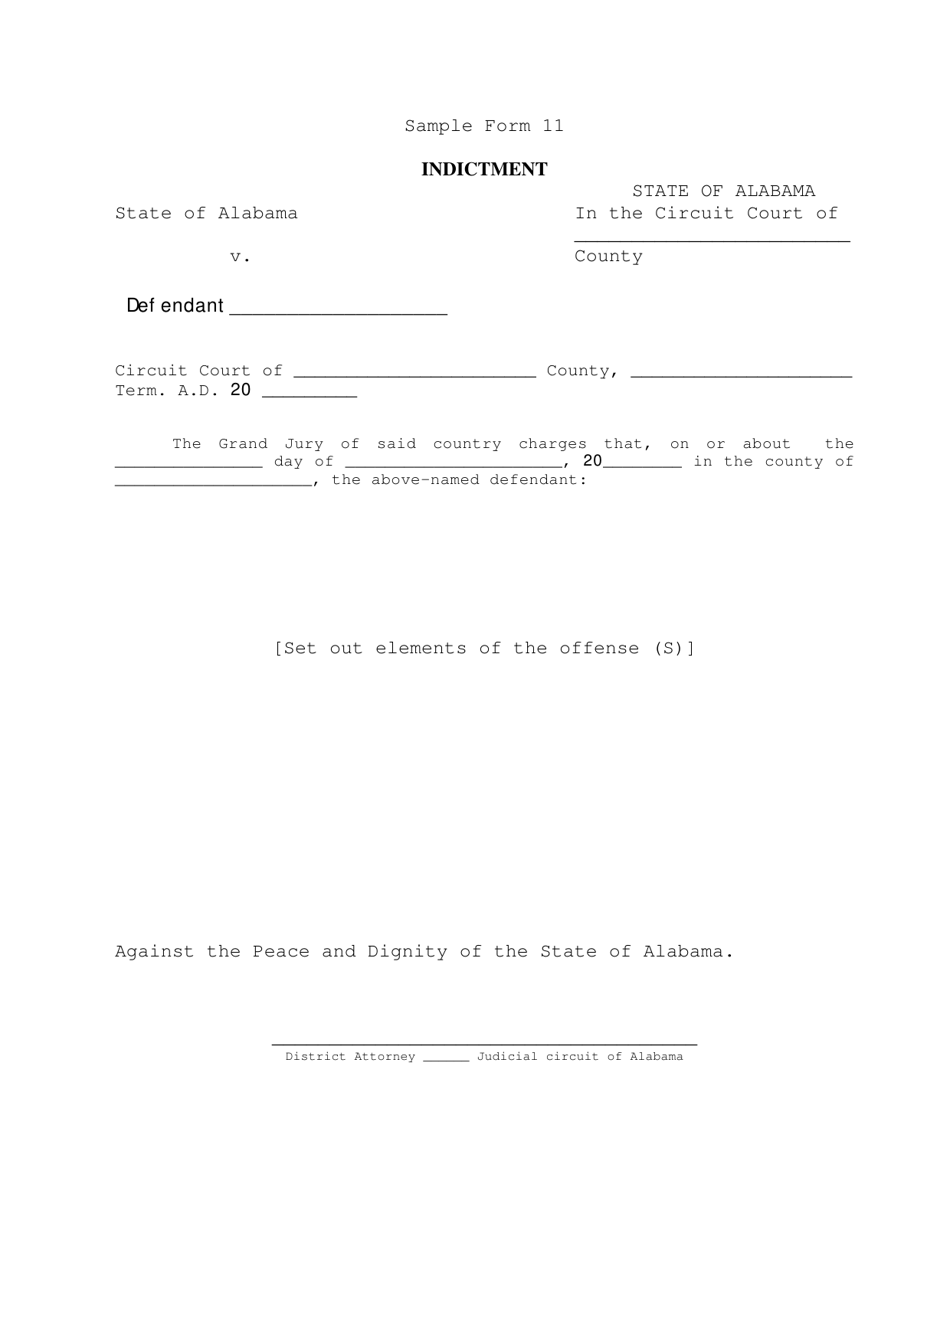 Sample Form 11 Indictment - Alabama, Page 1